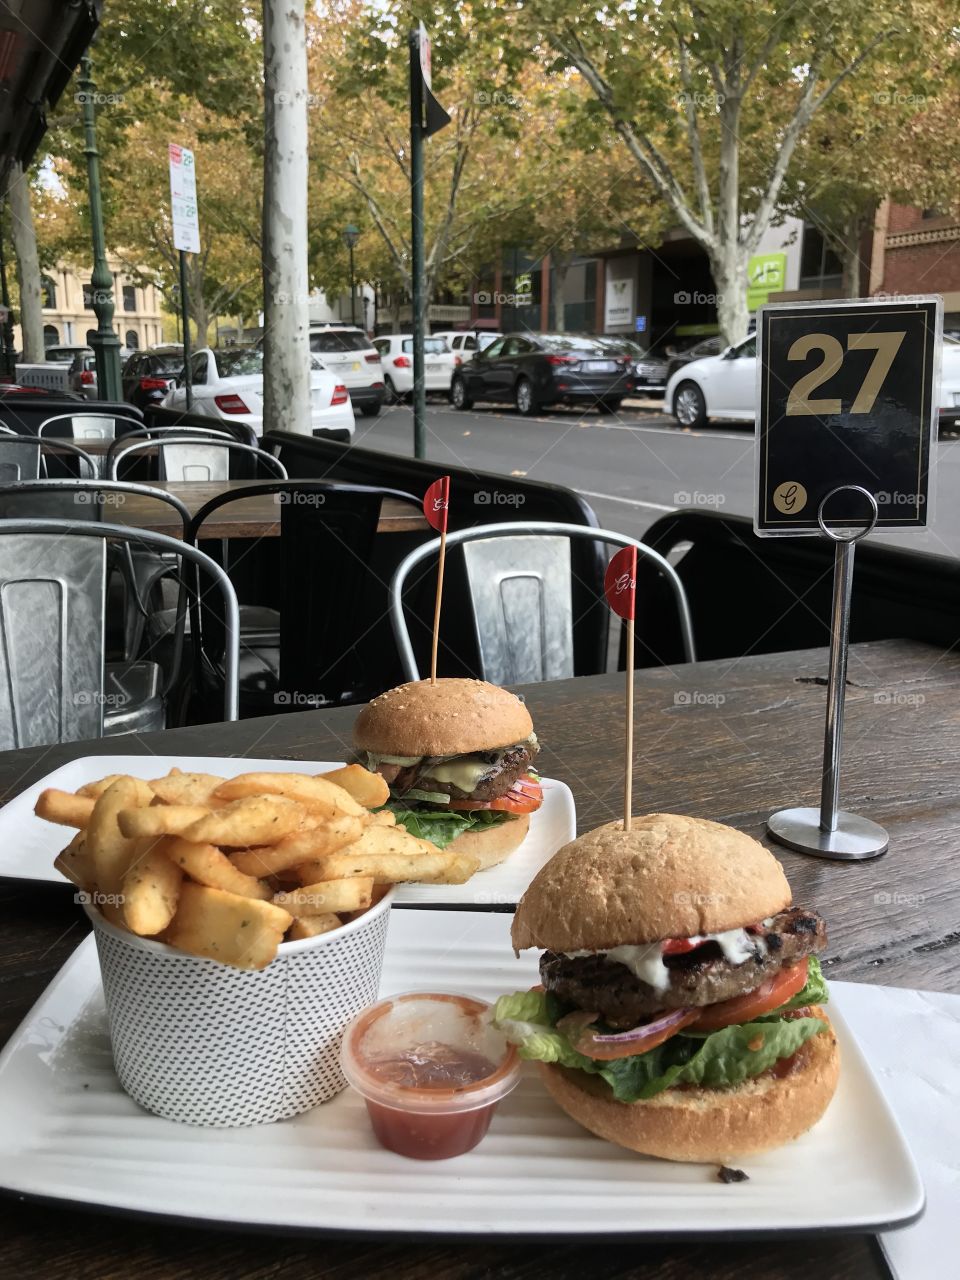 Burgers and chips at Grill’ in Bendigo town Melbourne Australia 